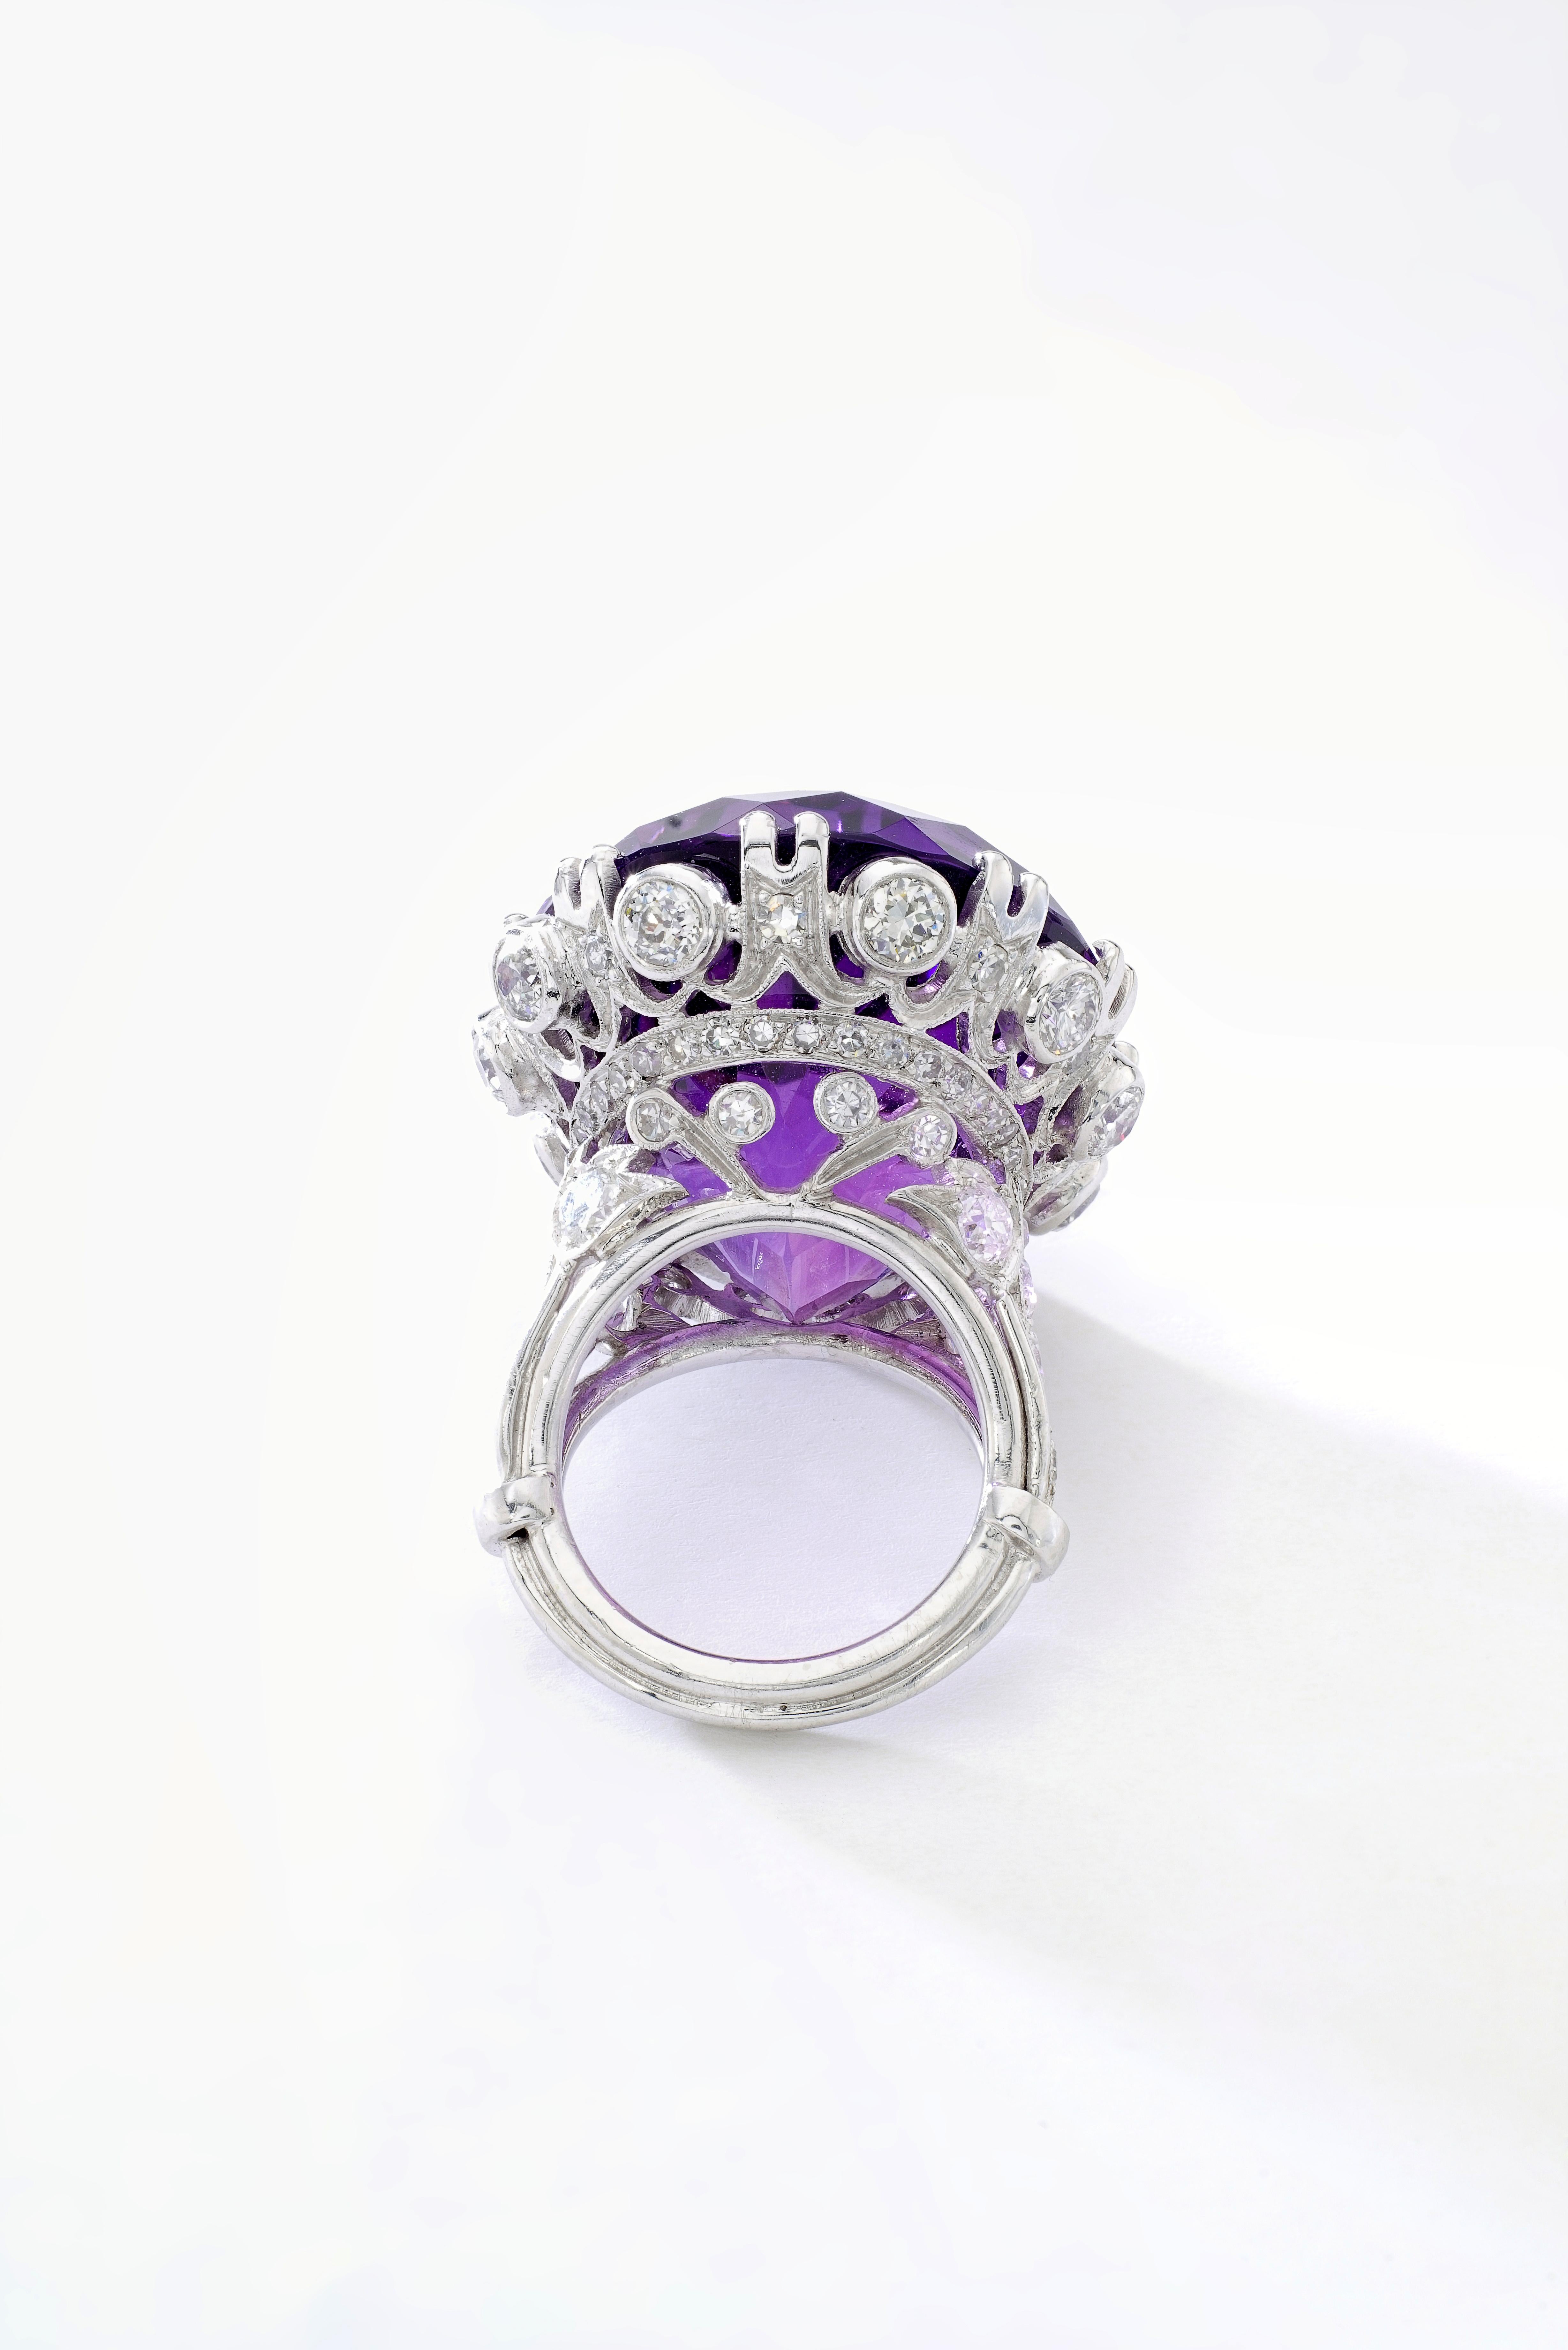 This Fantastic Oval Amethyst centering a Belle Epoque style Diamond and Platinum Ring.
Amethyst weight: approximatively 65.00 carats.

Gross weight: 33.70 grams.